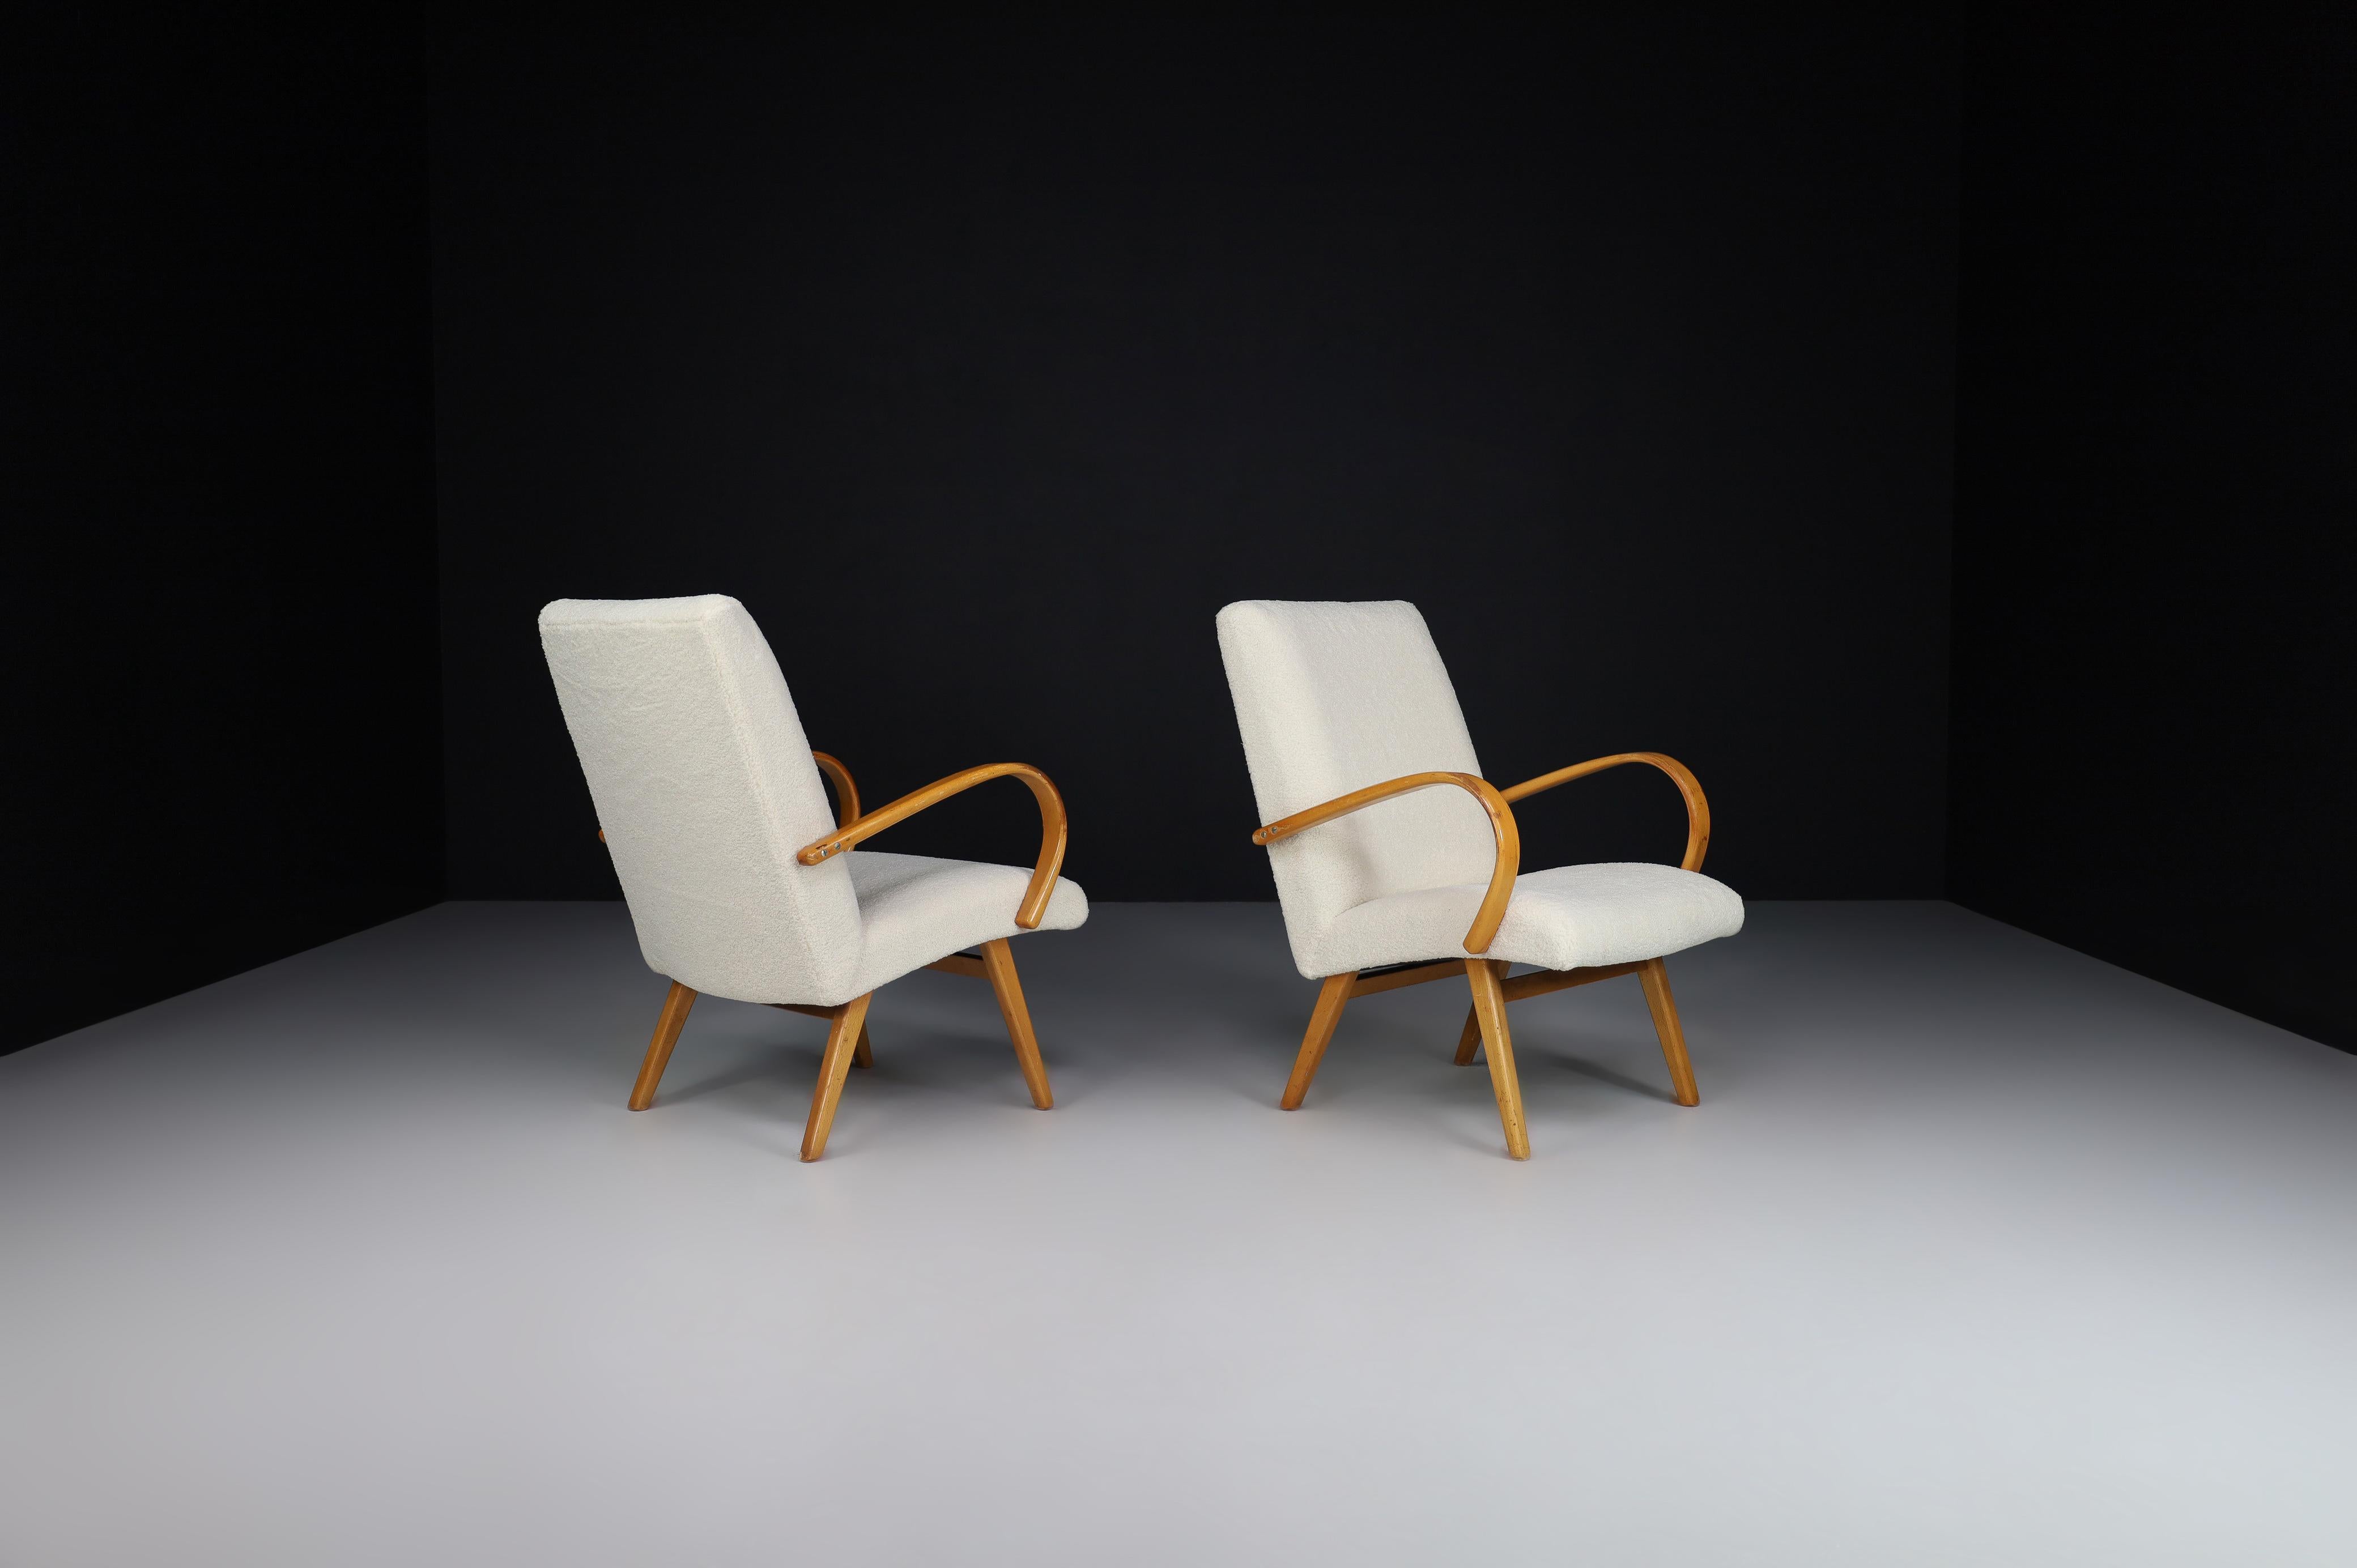 Czech Blond Bentwood Armchairs Manufactured and Designed in Praque, 1950s For Sale